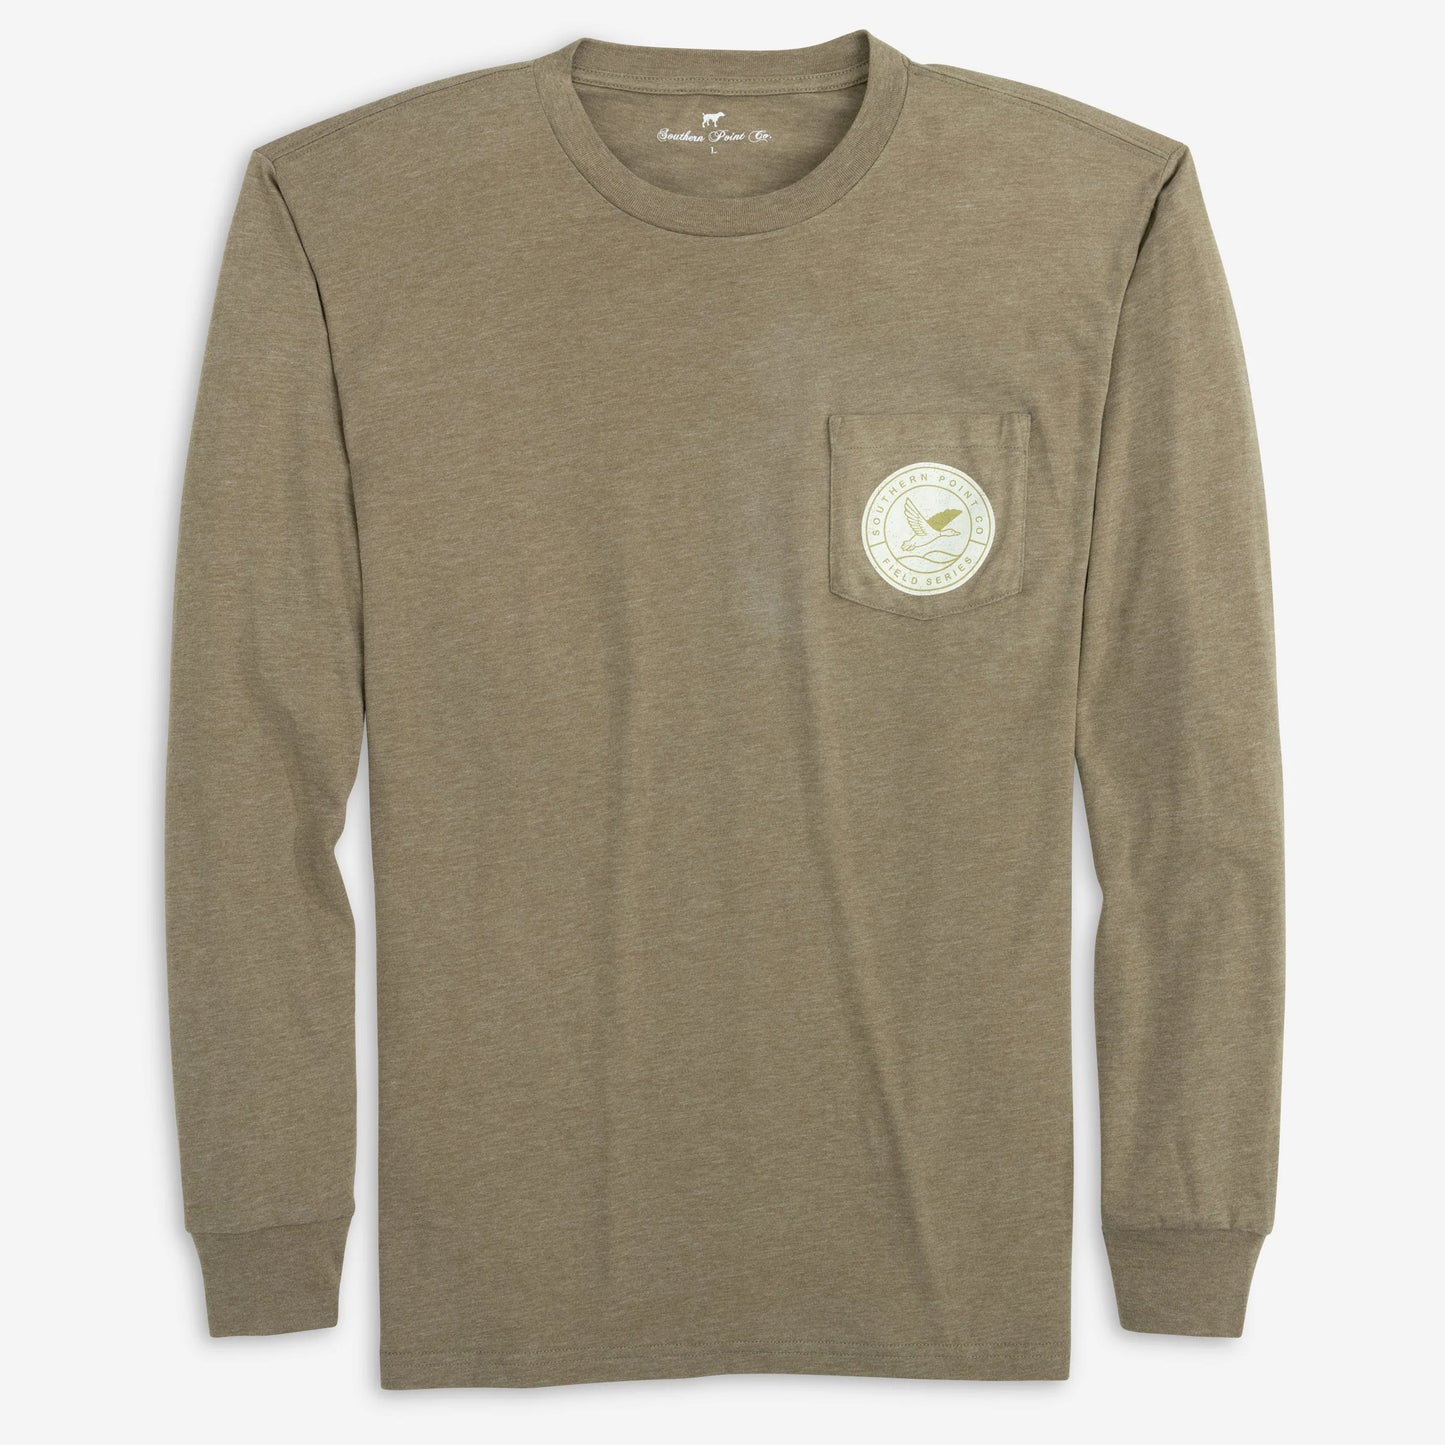 Southern Point- Youth Field Series L/S, Wood Grain